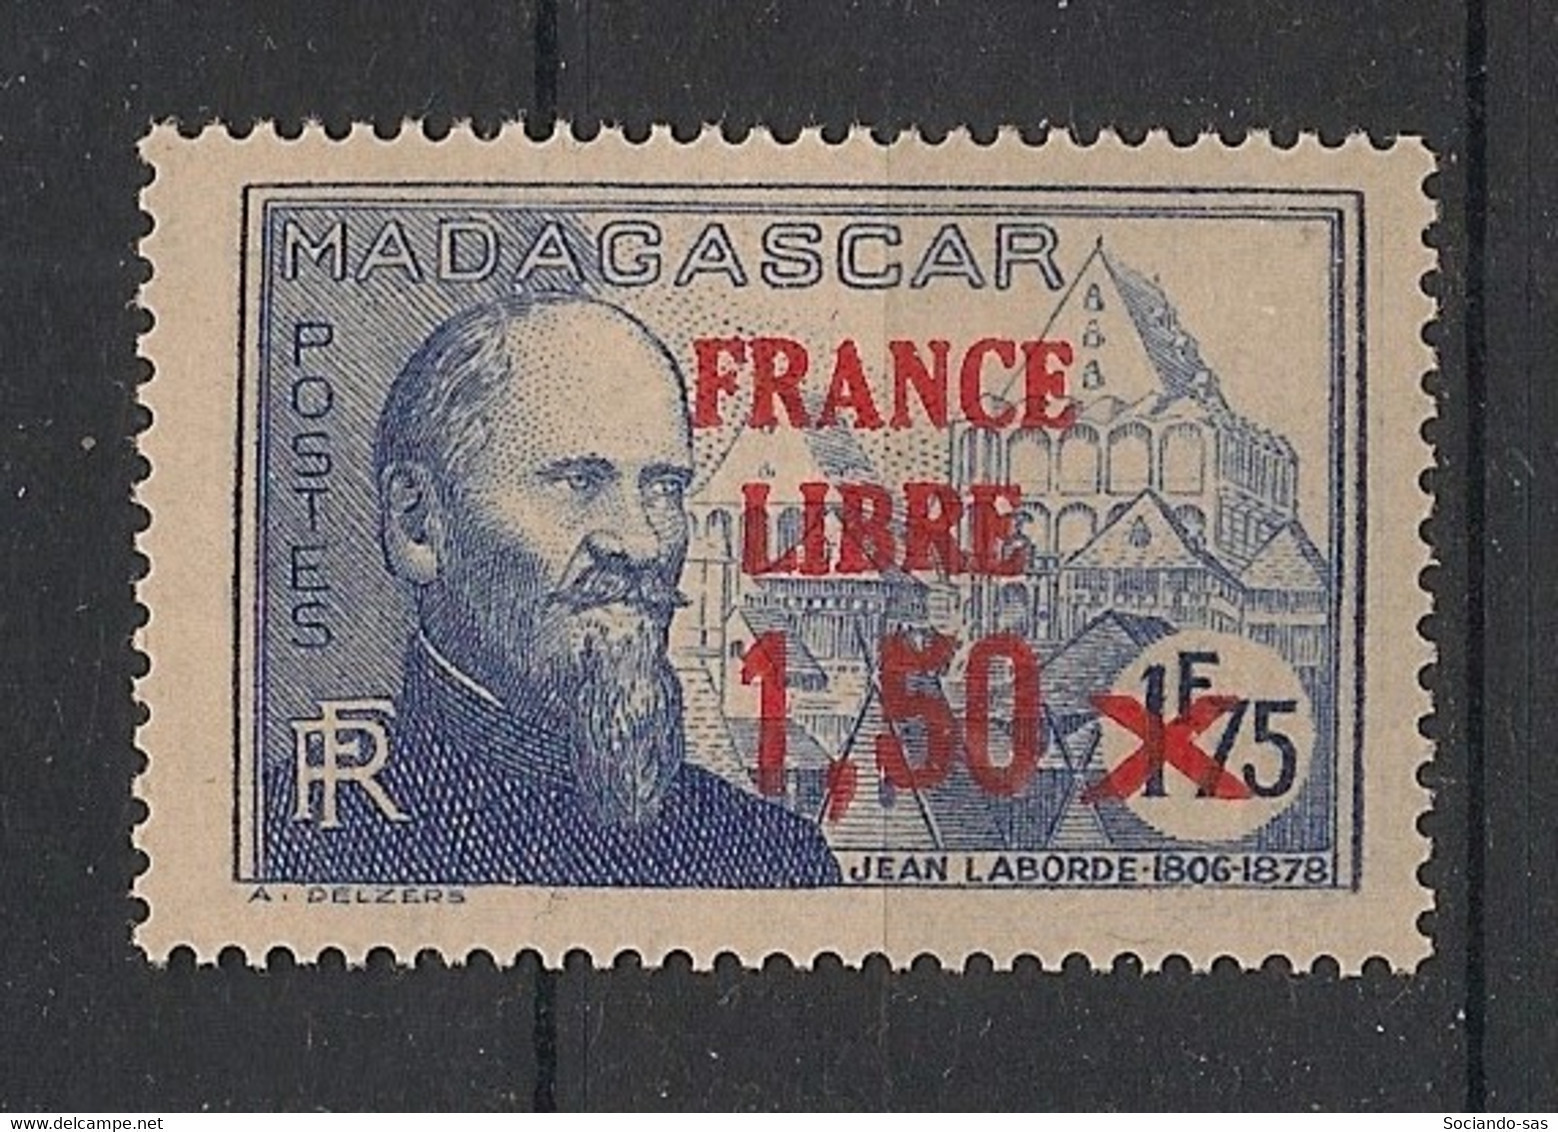 MADAGASCAR - 1942 - N°YT. 263 - France Libre 1f75 Sur 1f50 - Neuf Luxe ** / MNH / Postfrisch - Unused Stamps